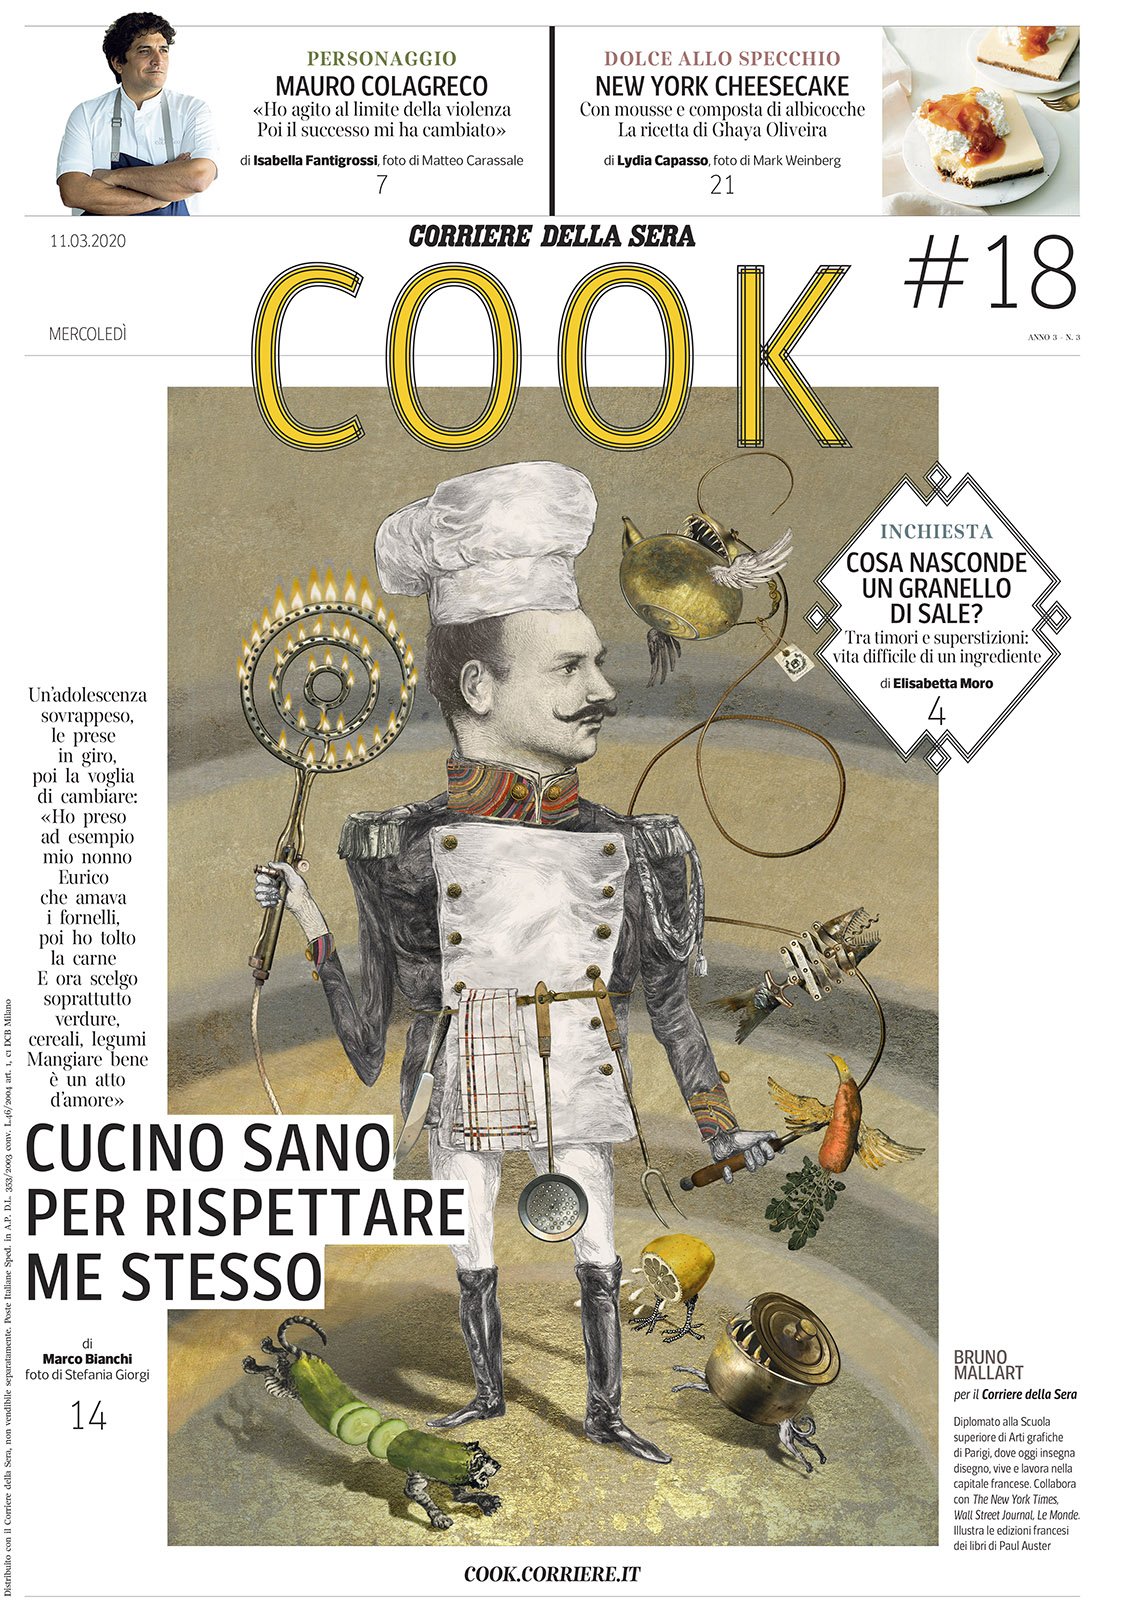 Cook cover.jpg